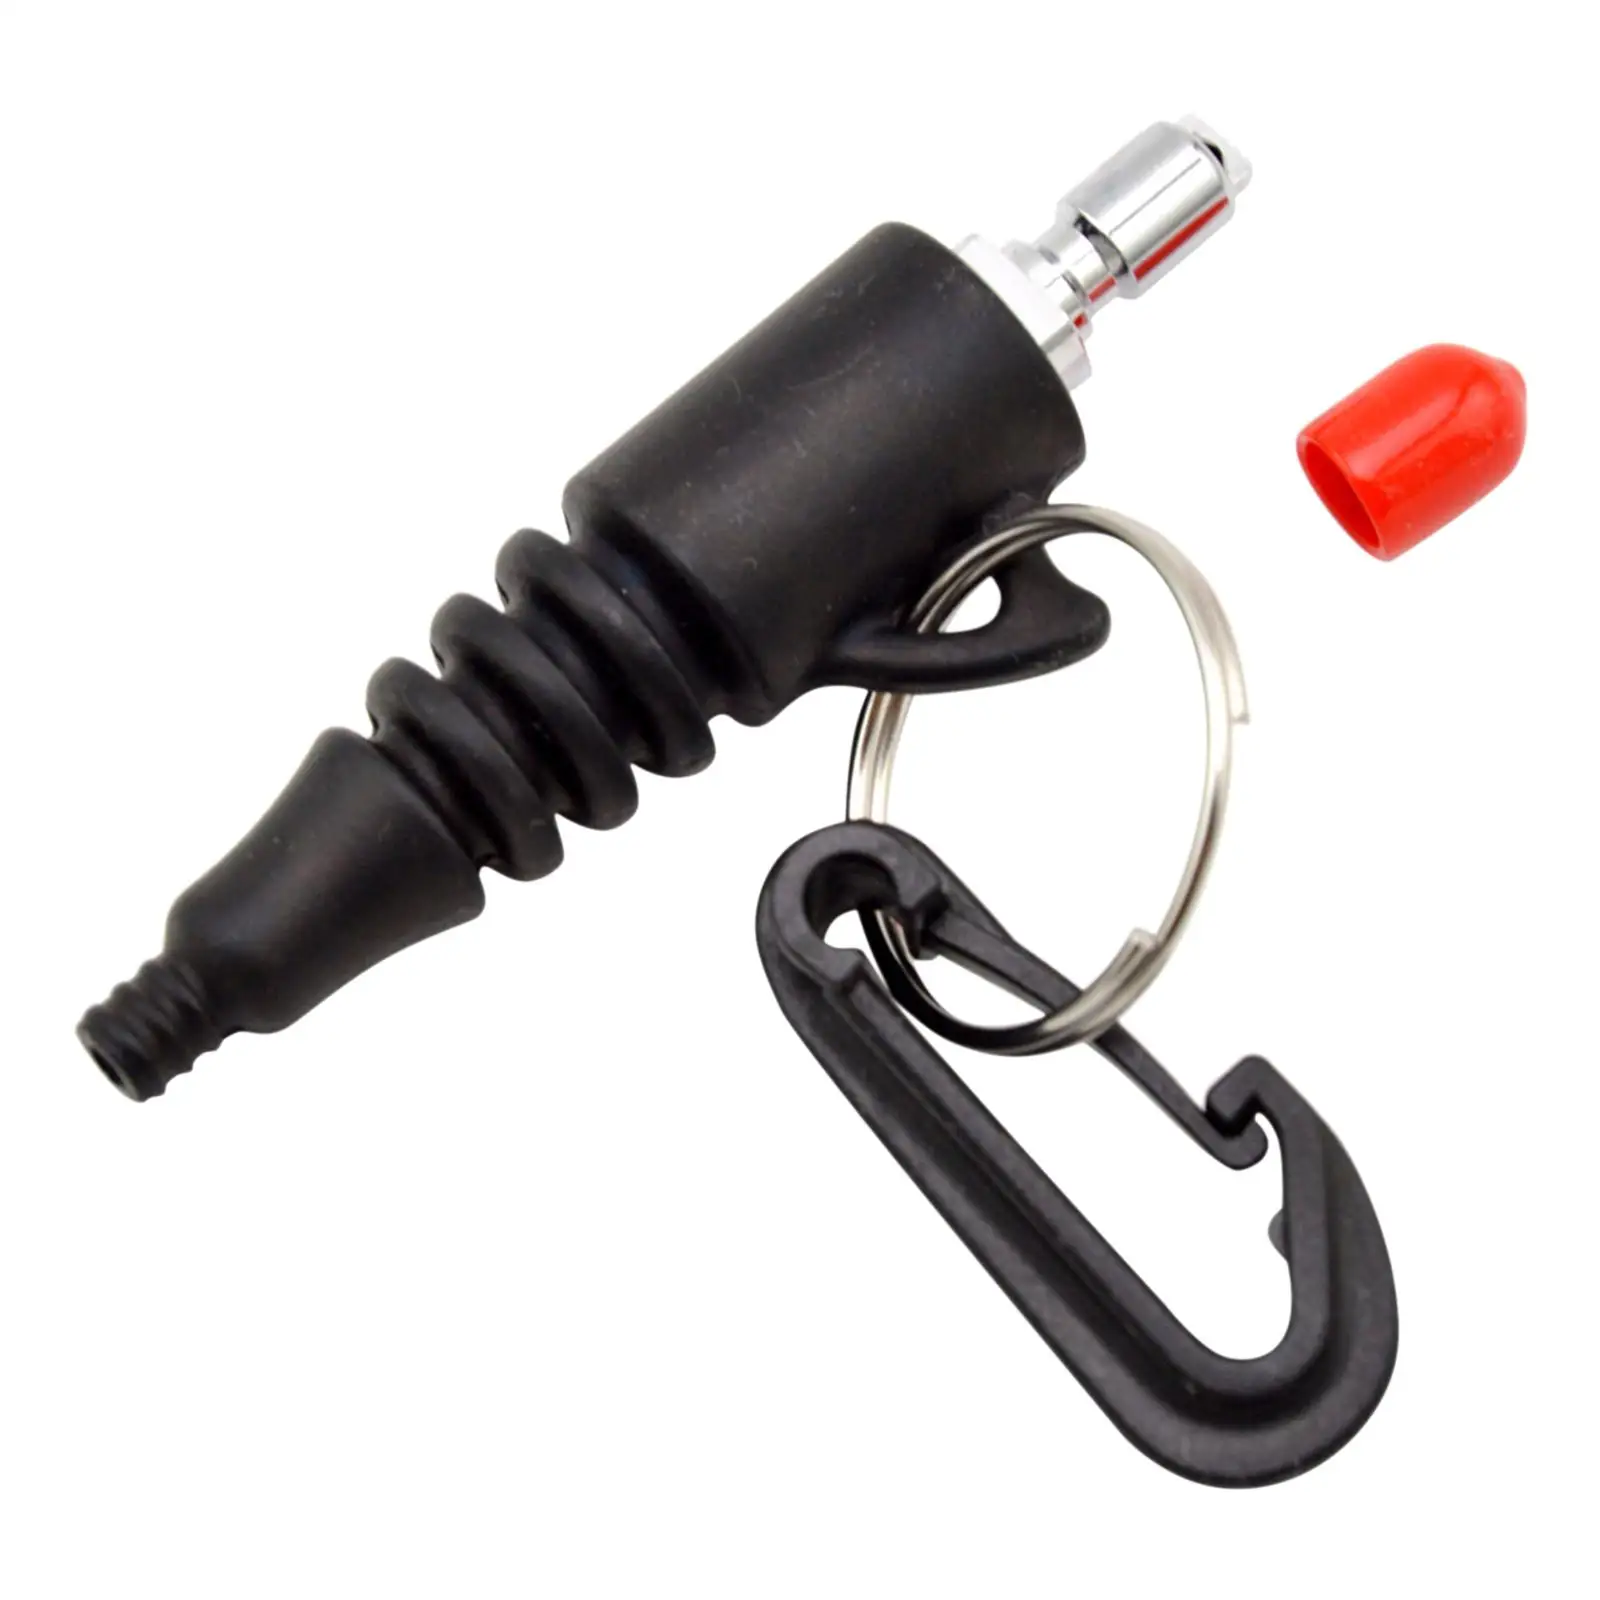 Professional Scuba Diving Air Nozzle for BCD Inflator Hose Snorkeling Boating